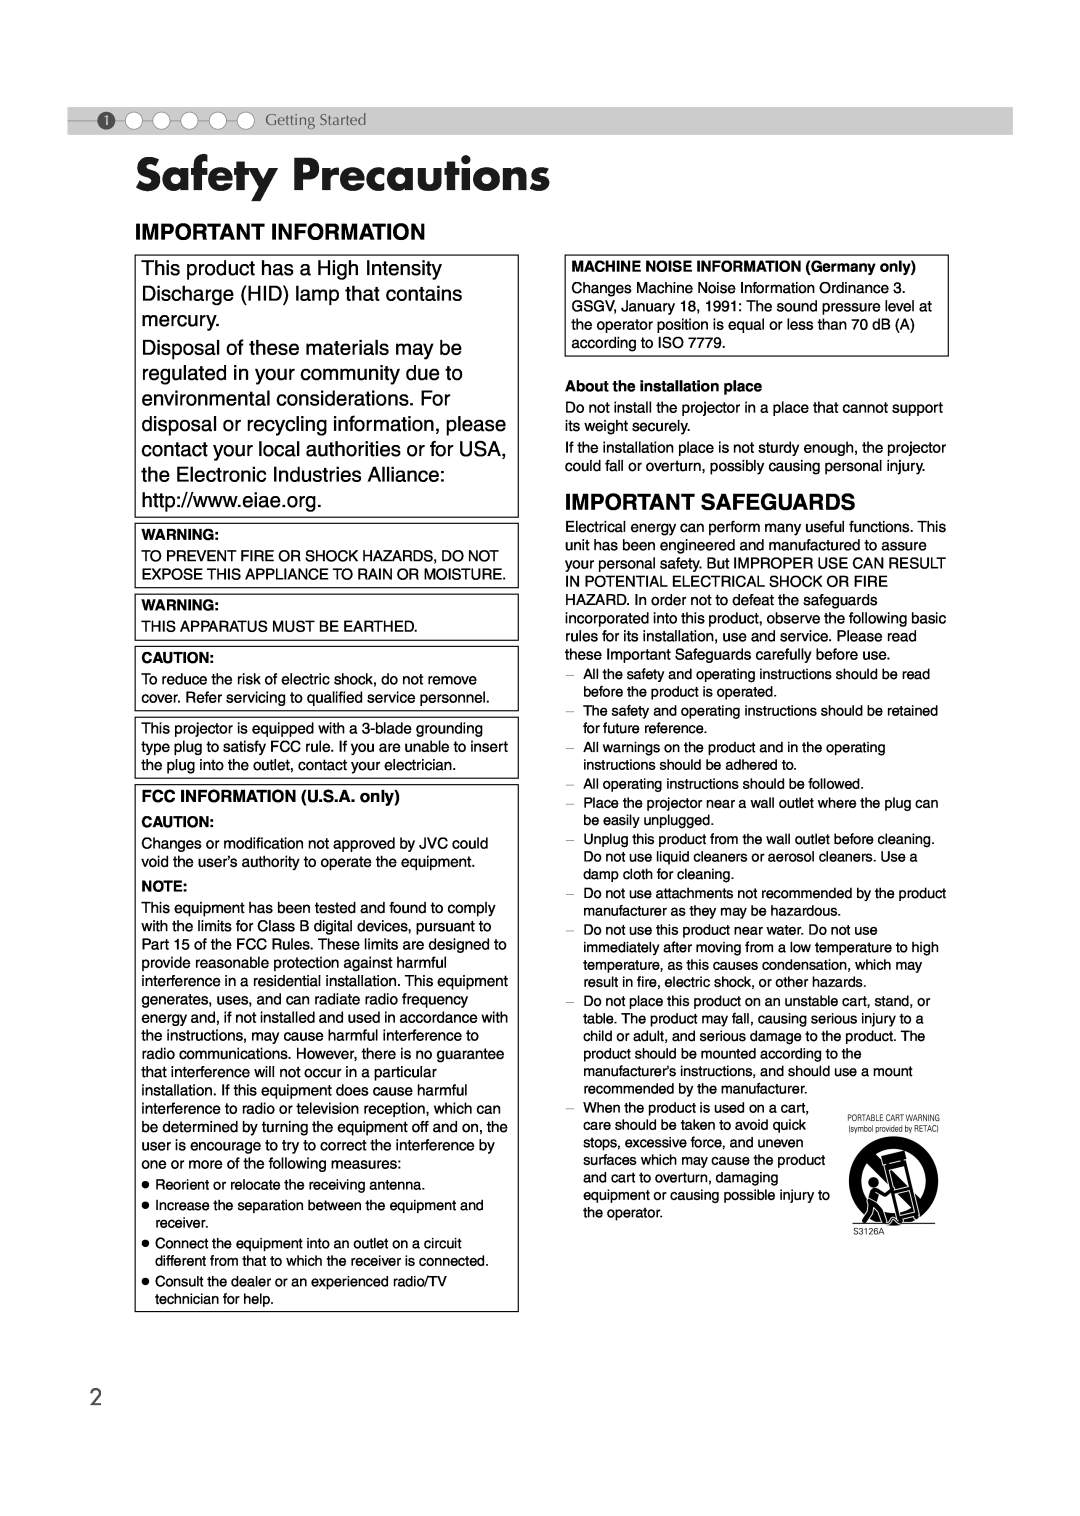 JVC DLA-RS2 manual Safety Precautions, Important Information, Important Safeguards, FCC INFORMATION U.S.A. only 